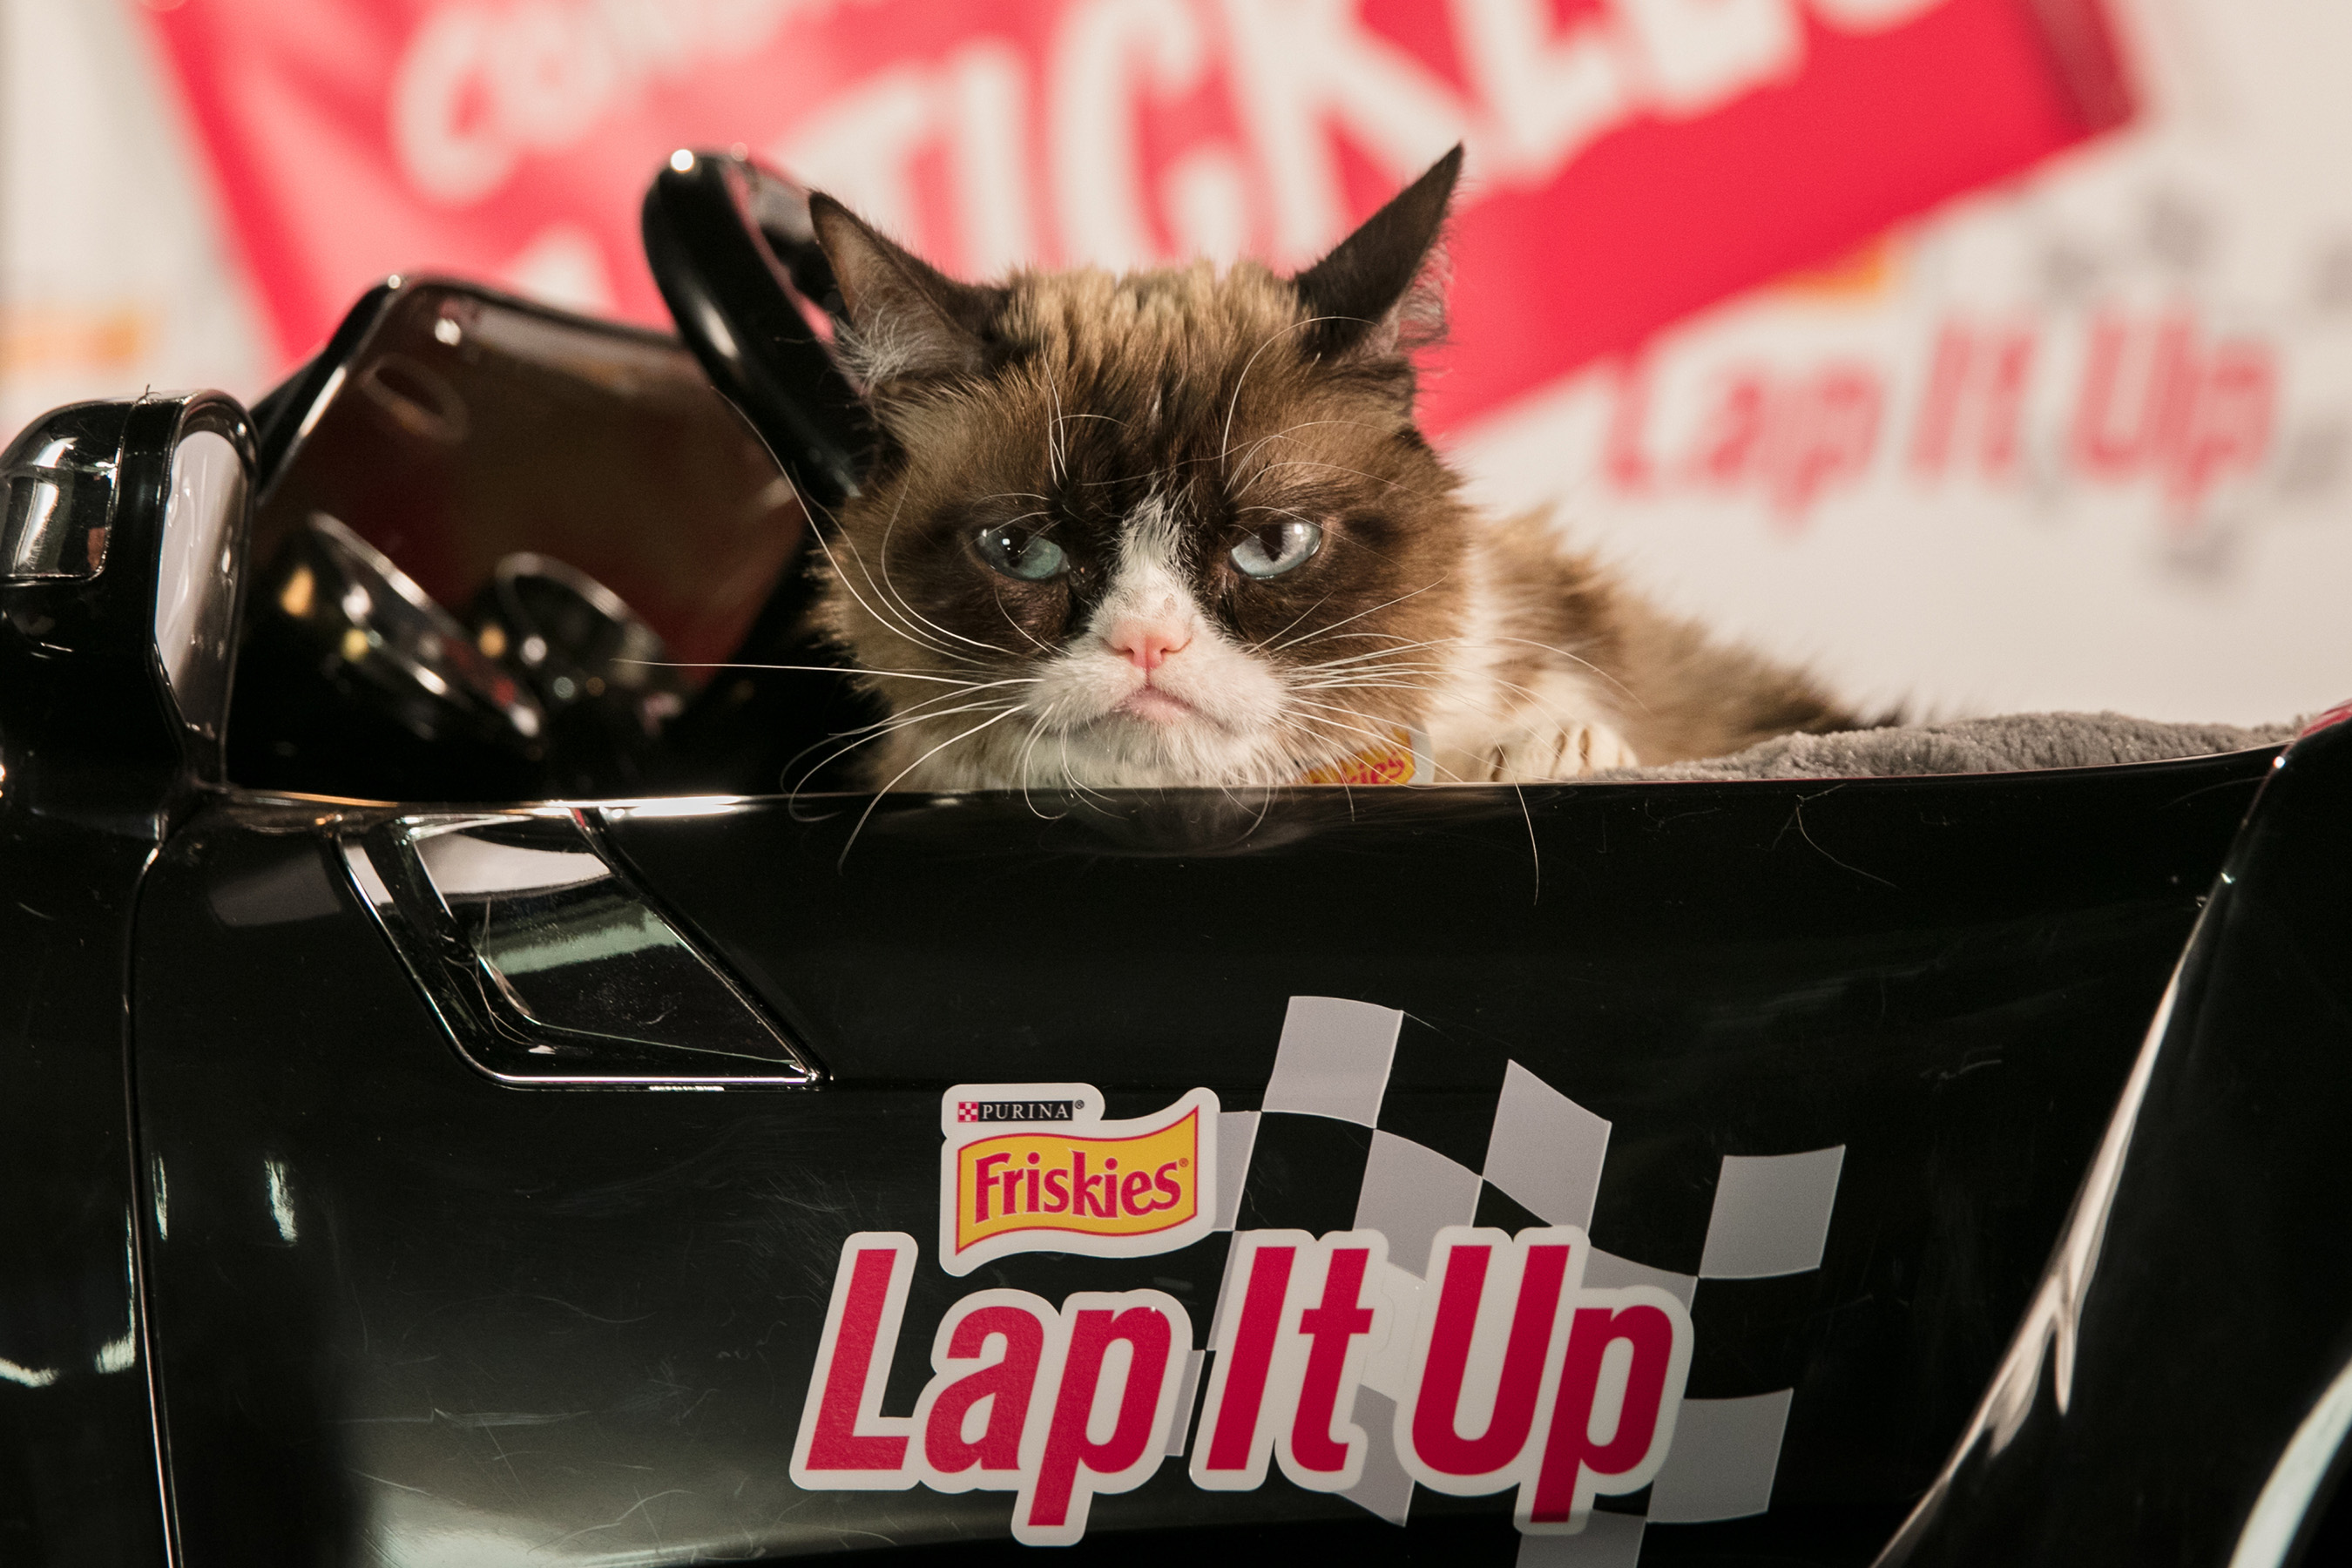 In the 60-second video, Grumpy Cat shamelessly tries to "motivate" Mr. Tickles who is on a quest to become the "First Cat of Professional Racing" as he sets out to "Lap It Up" at the track.